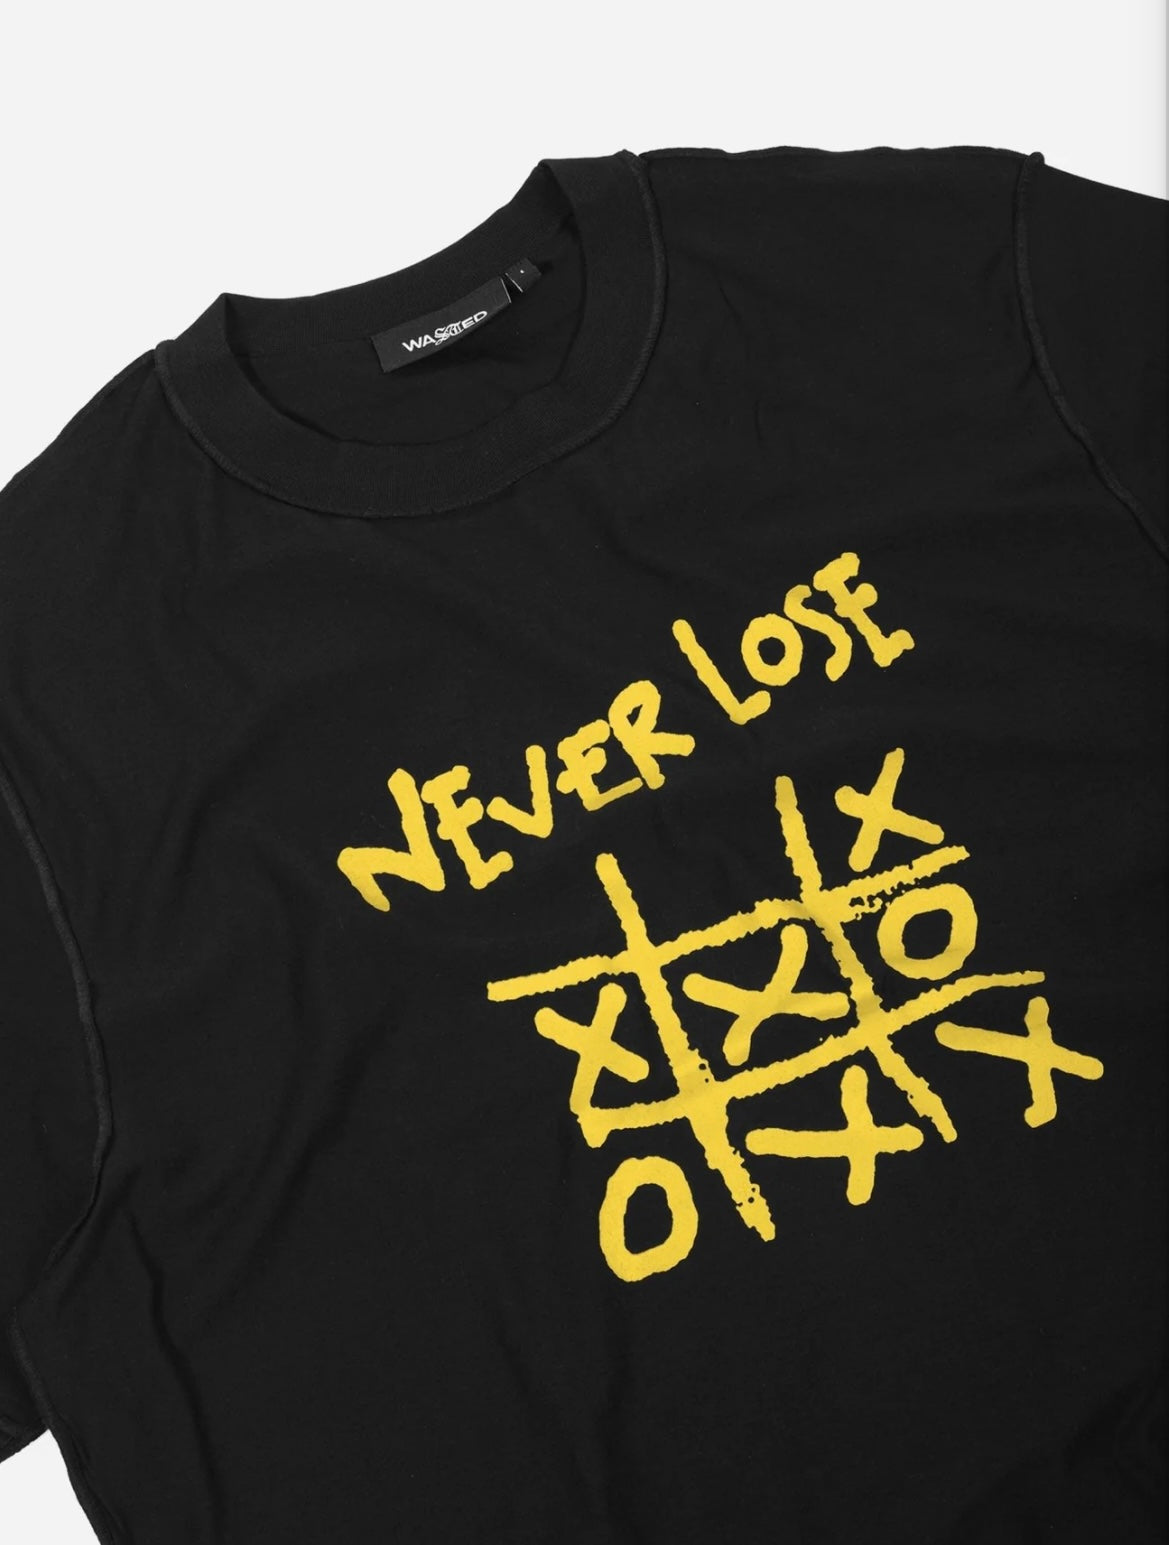 Never Lose T-Shirt Black - Wasted Paris